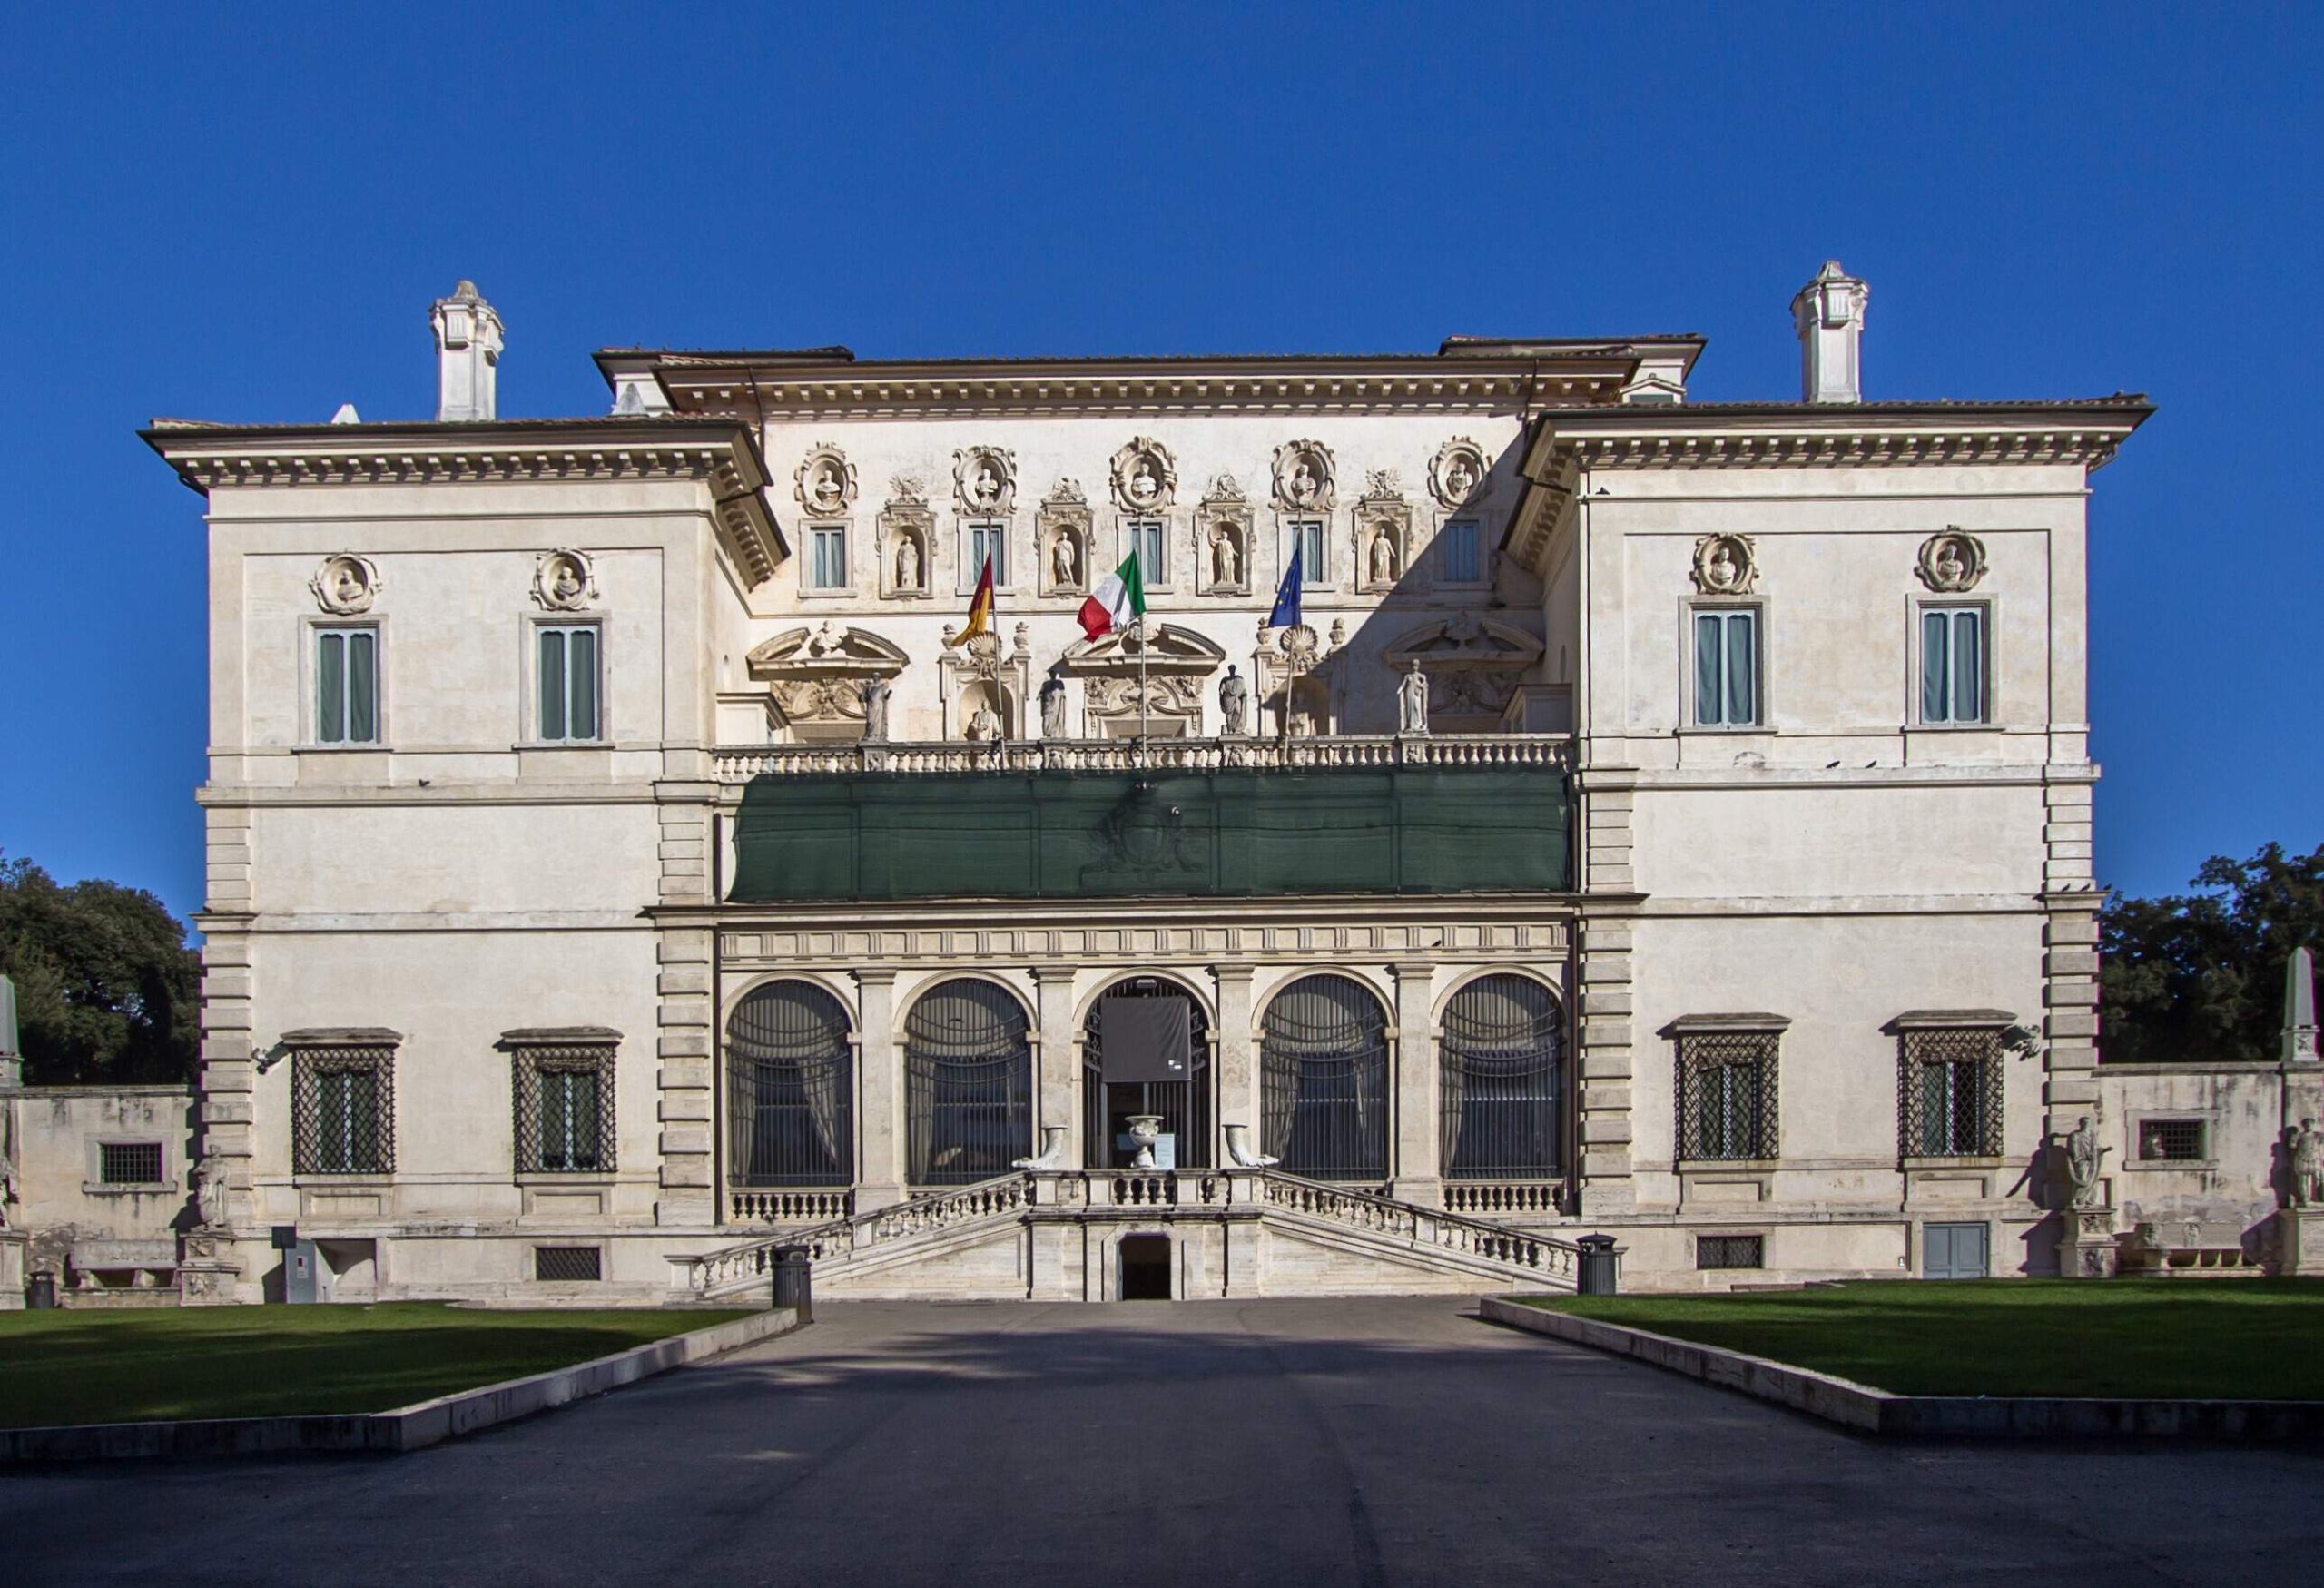 Galleria Borghese is an art gallery with a grand front staircase, arch windows, and intricately carved façade between two square buildings.